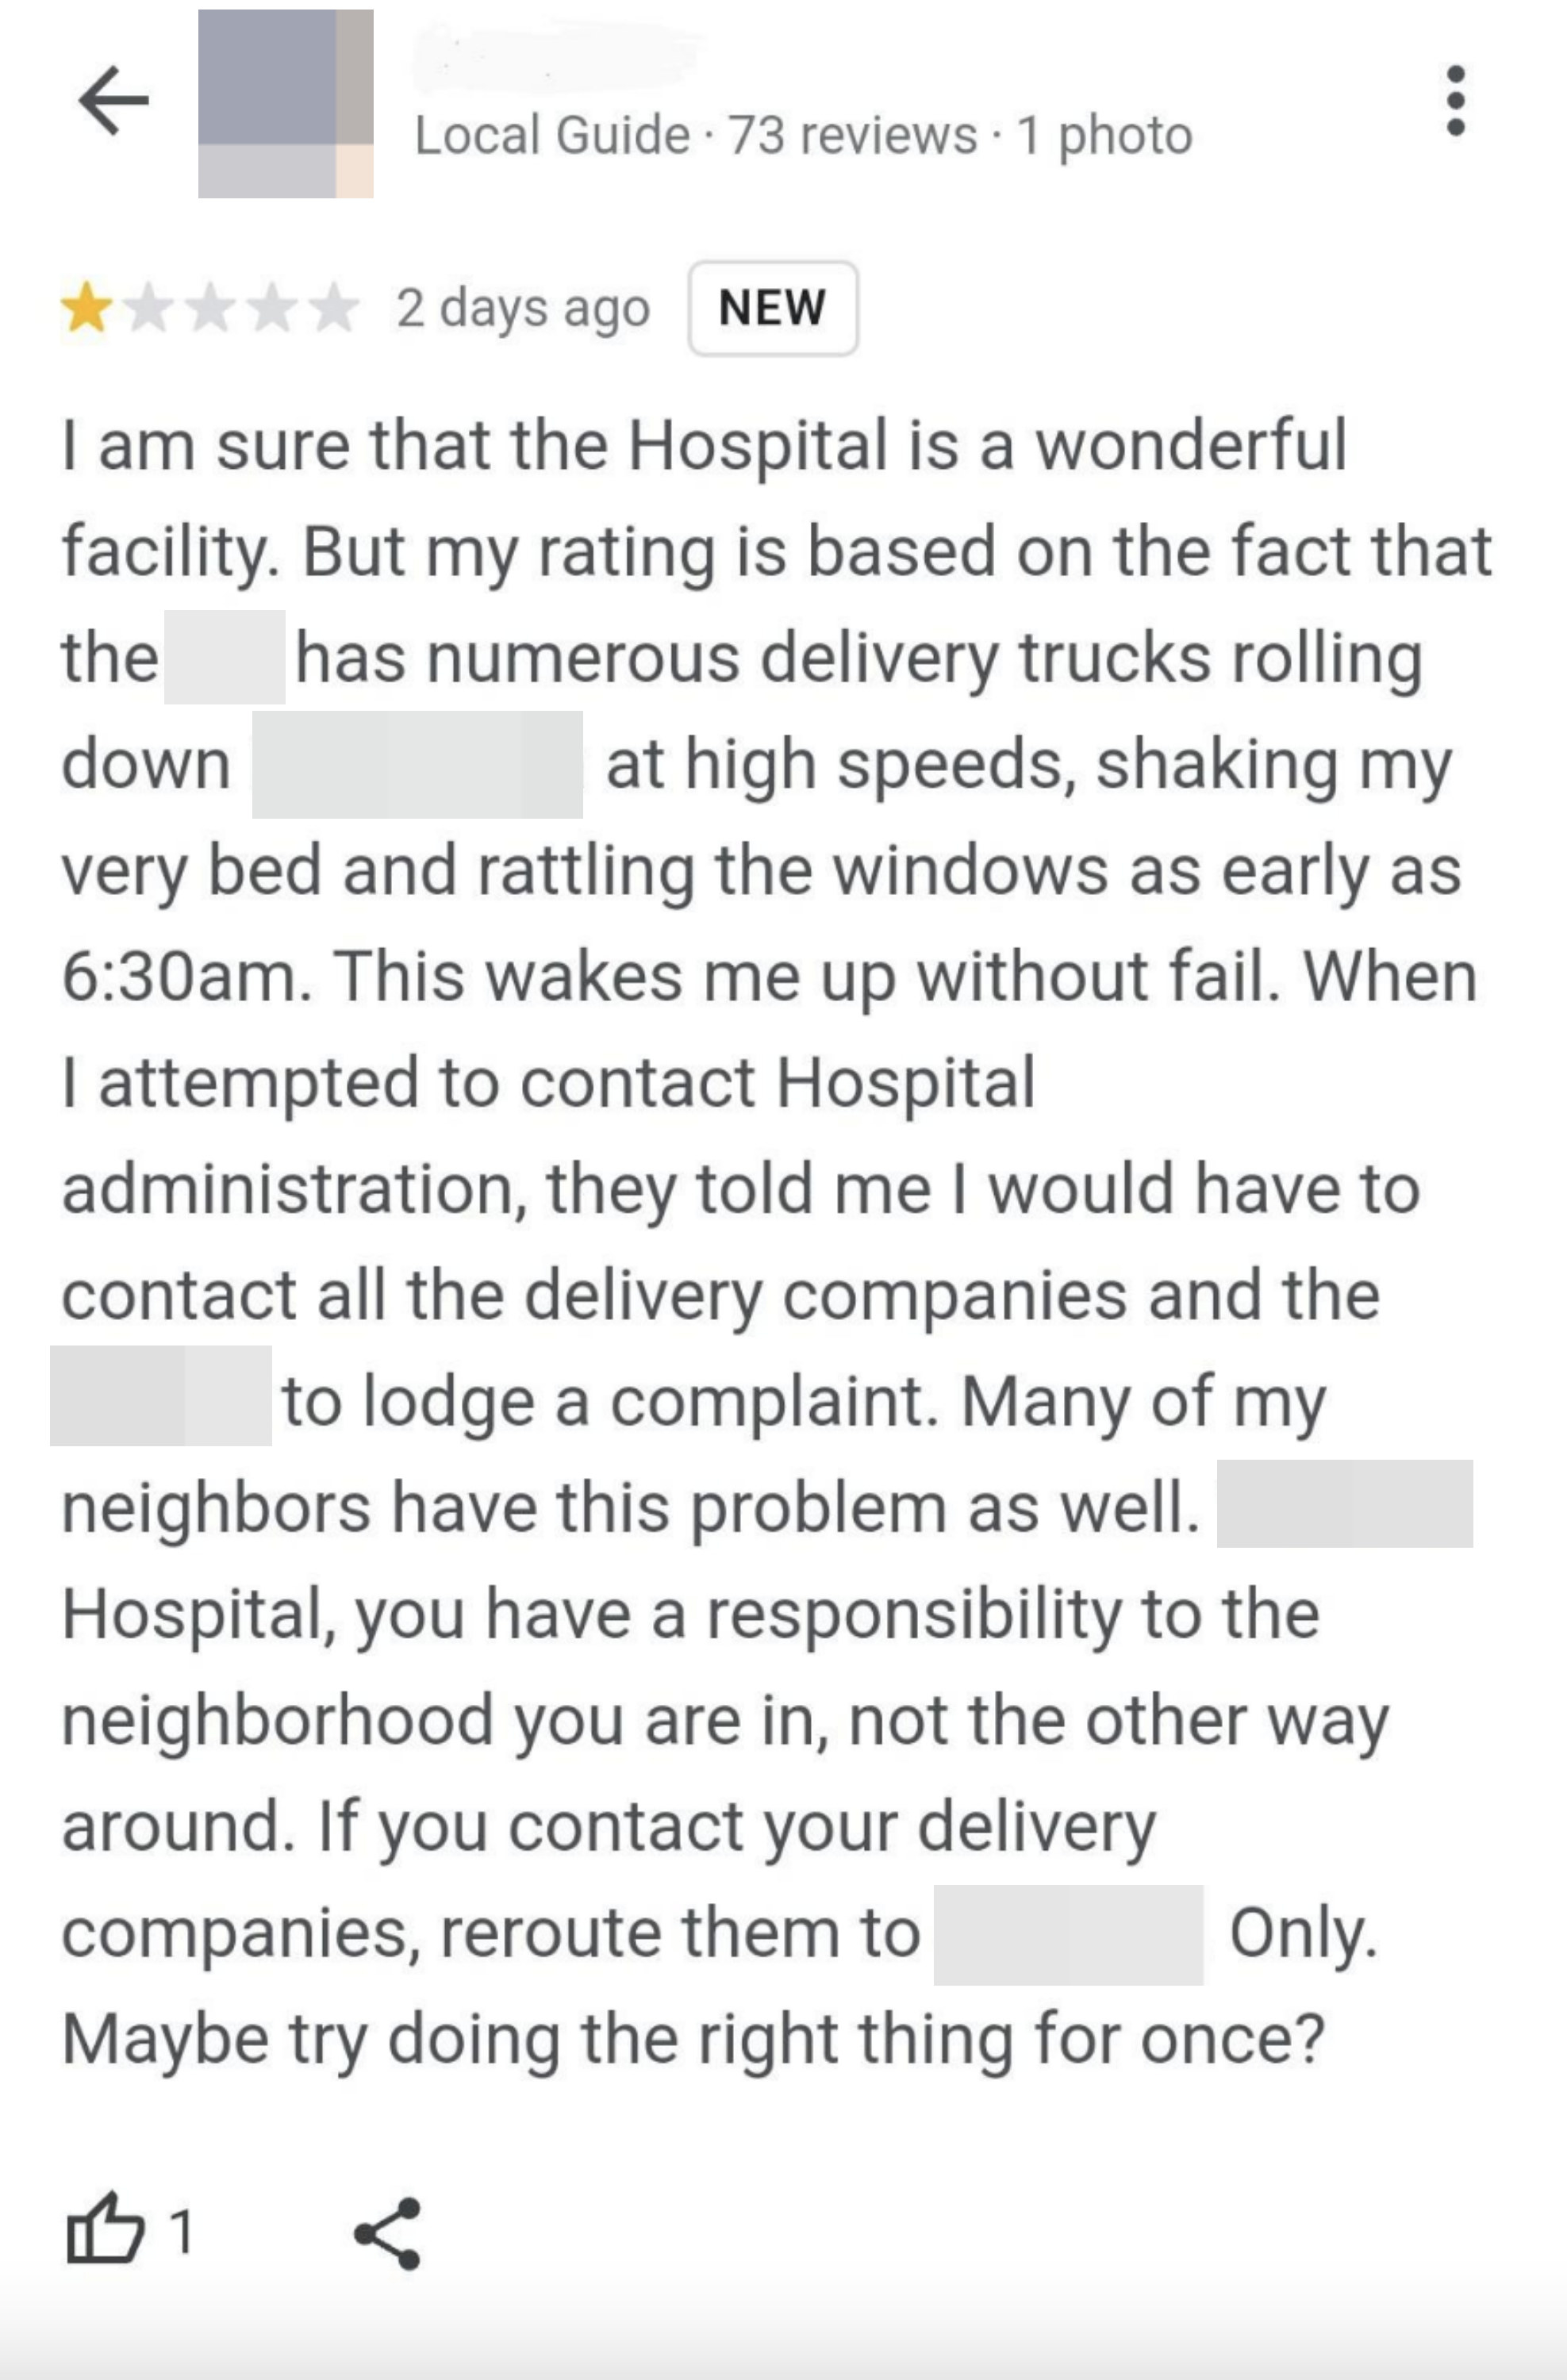 someone left a one star review because the delivery trucks at the hospital zoom by their apartment and make everything shake